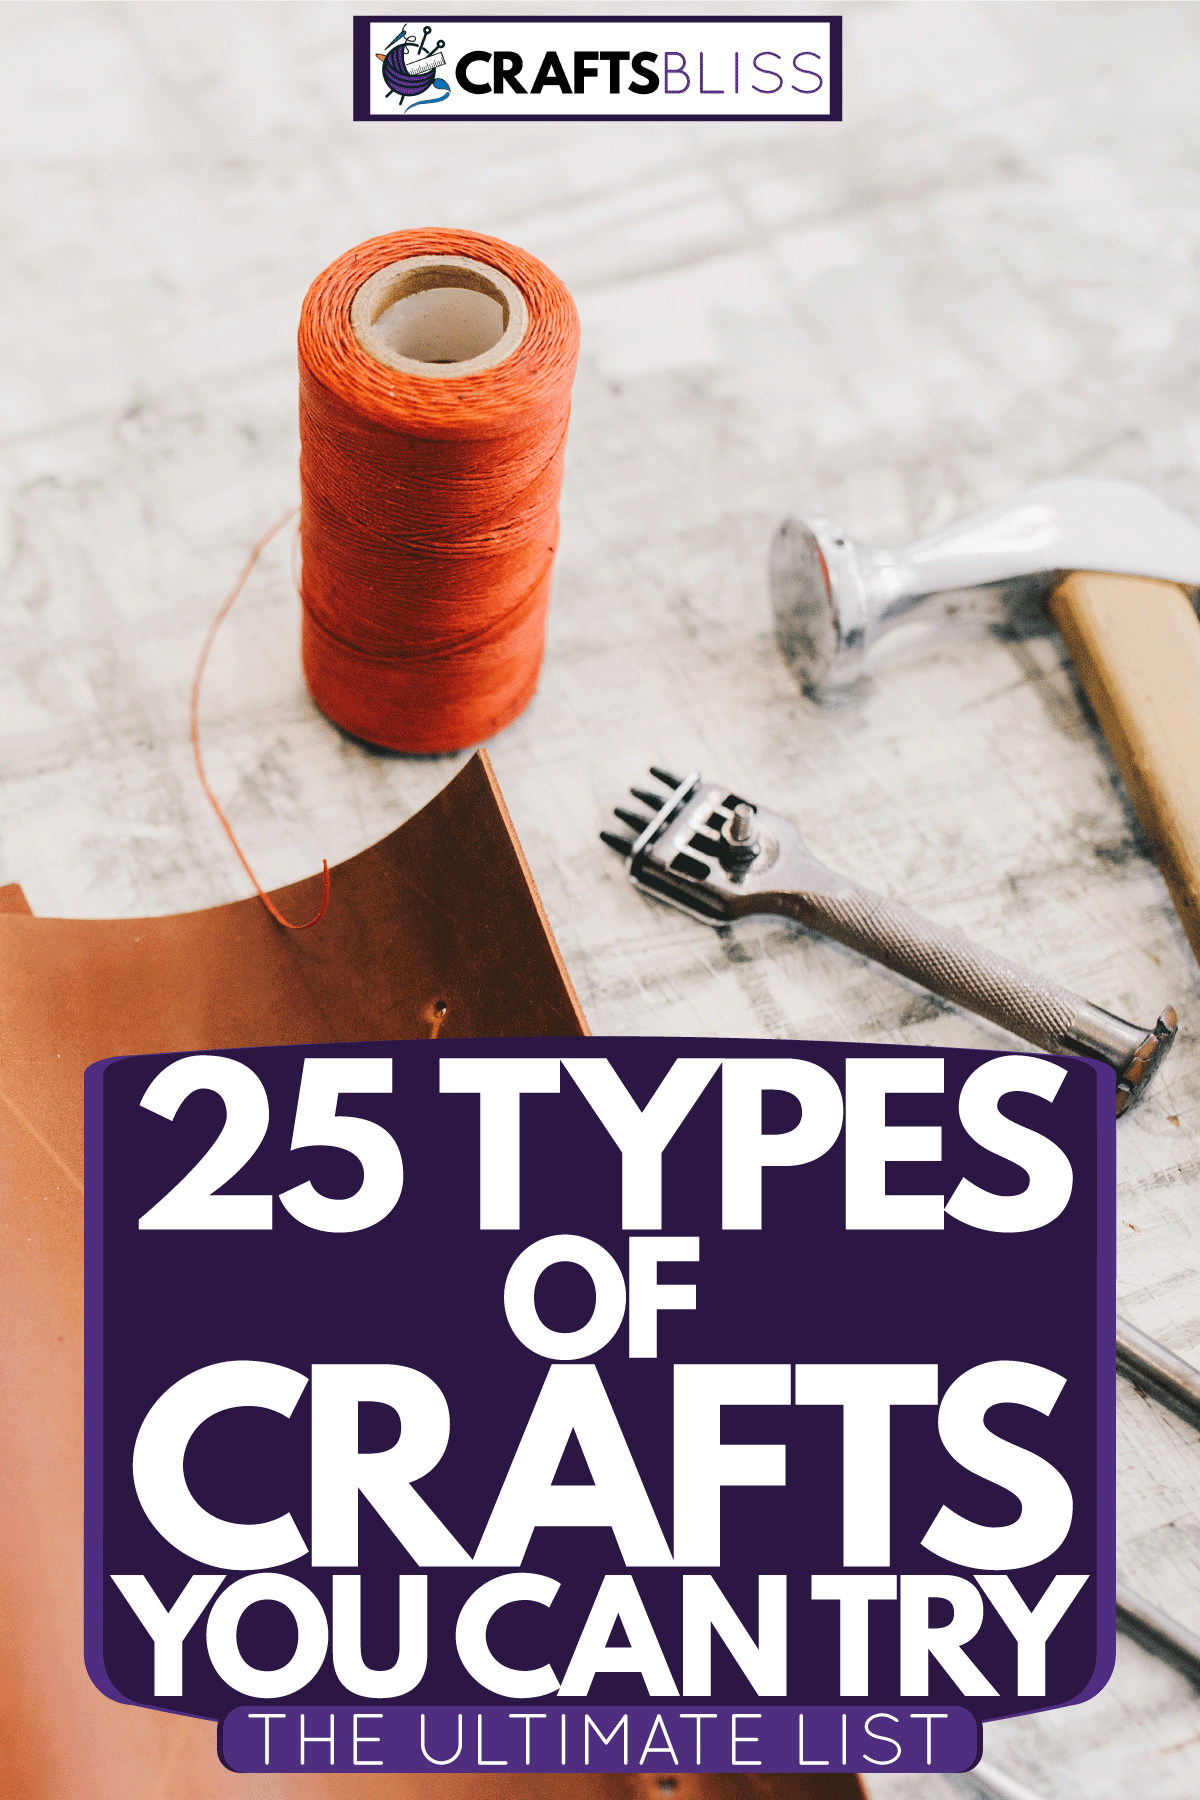 Leather stitching project with leather equipments, 25 Types Of Crafts You Can Try - The Ultimate List